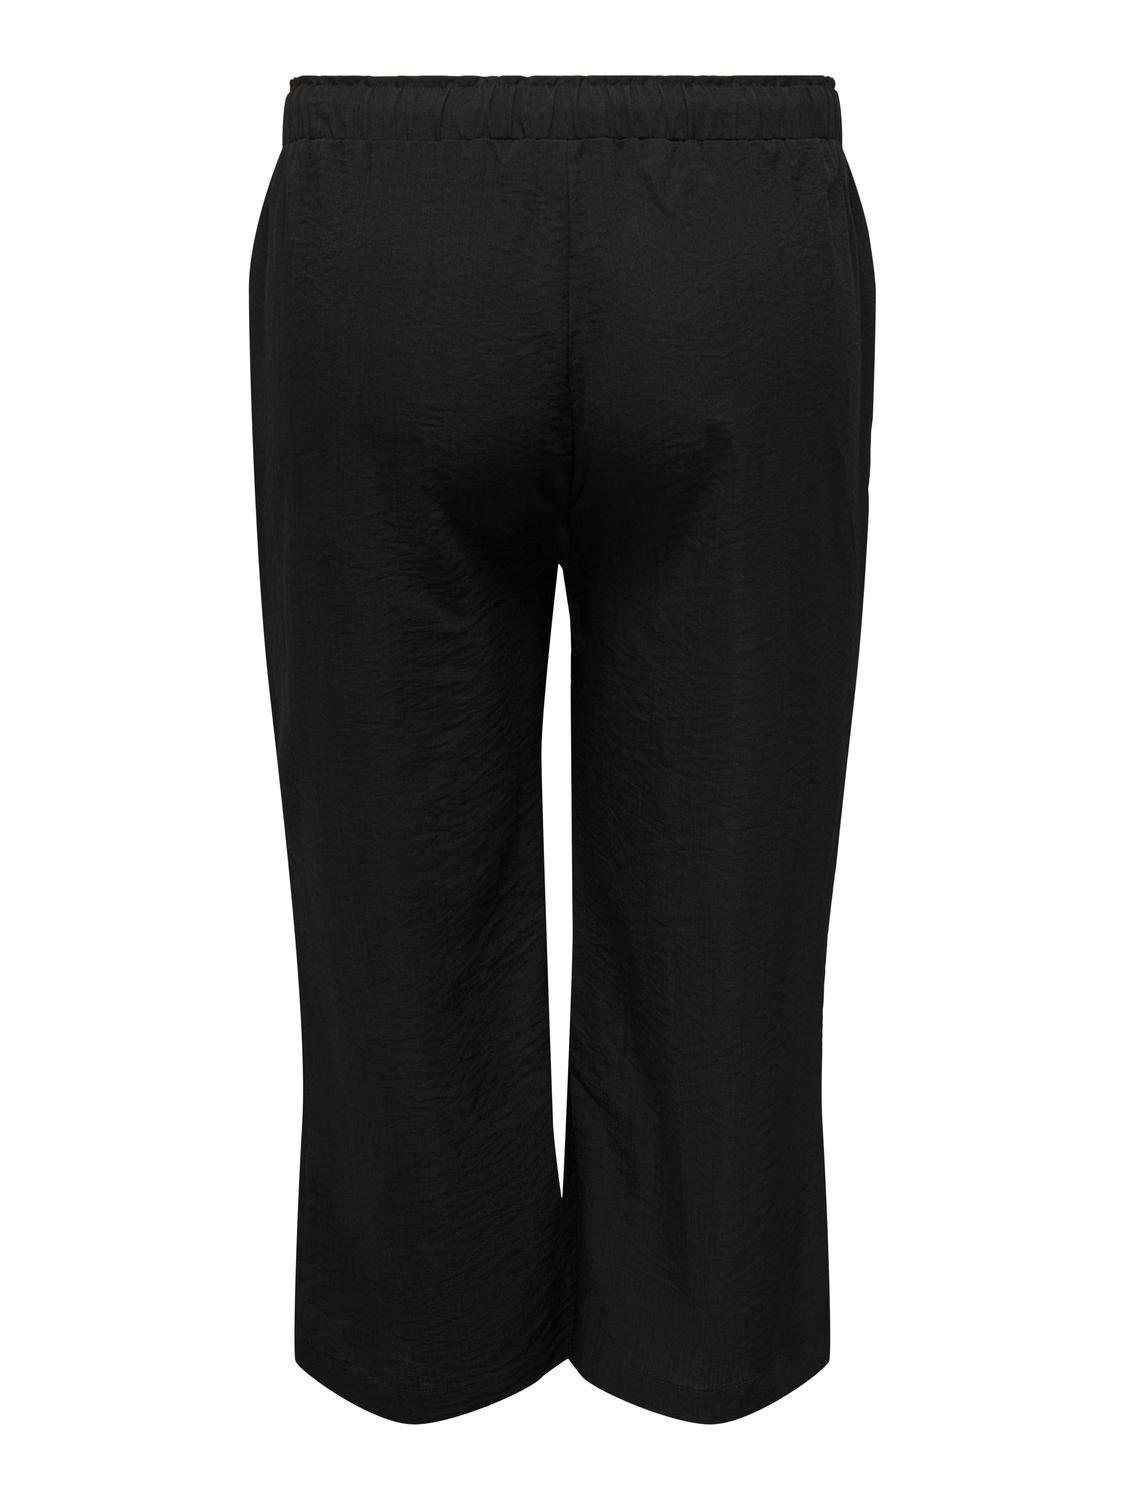 ONLY Curvy culotte trousers -Black - 15312294